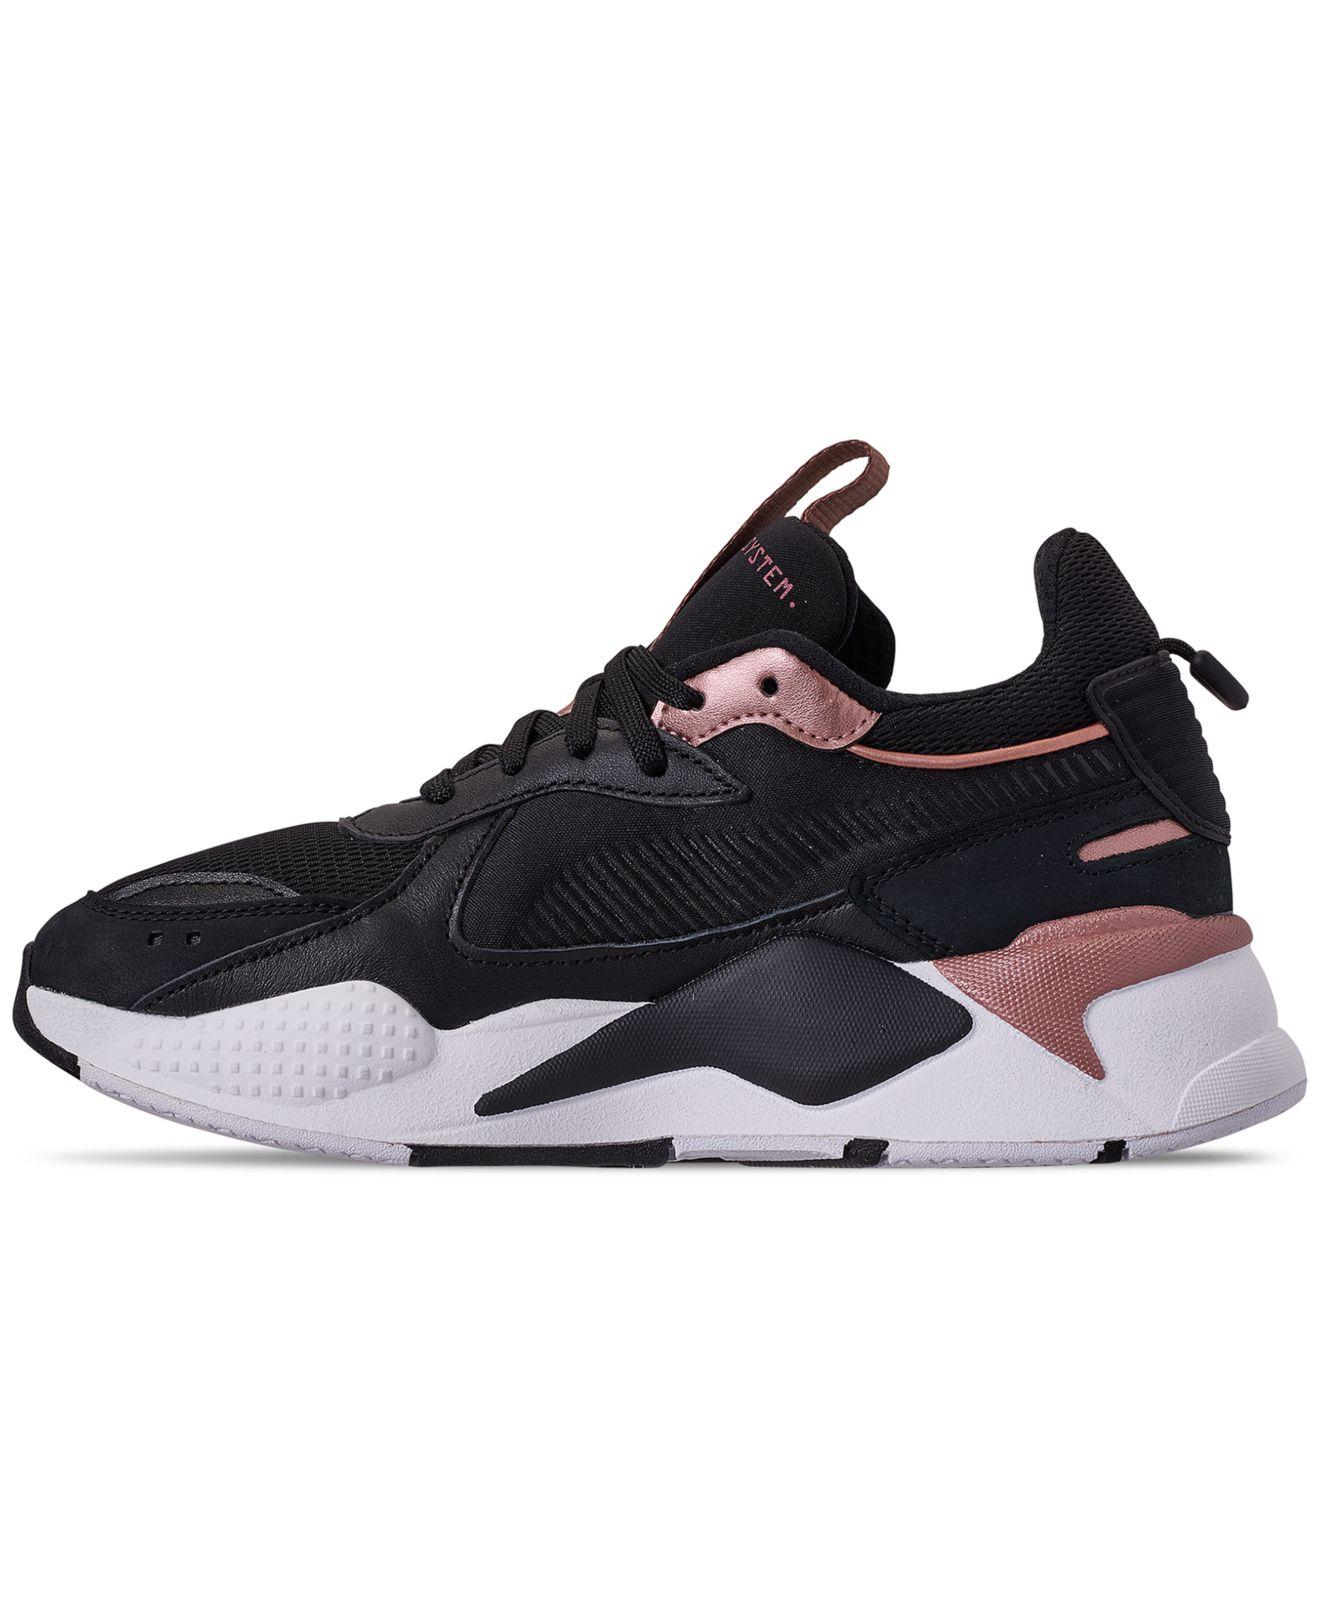 PUMA Synthetic Women's Rs - X Trophy Low - Top Sneakers in Black/Rose Gold  (Black) - Lyst